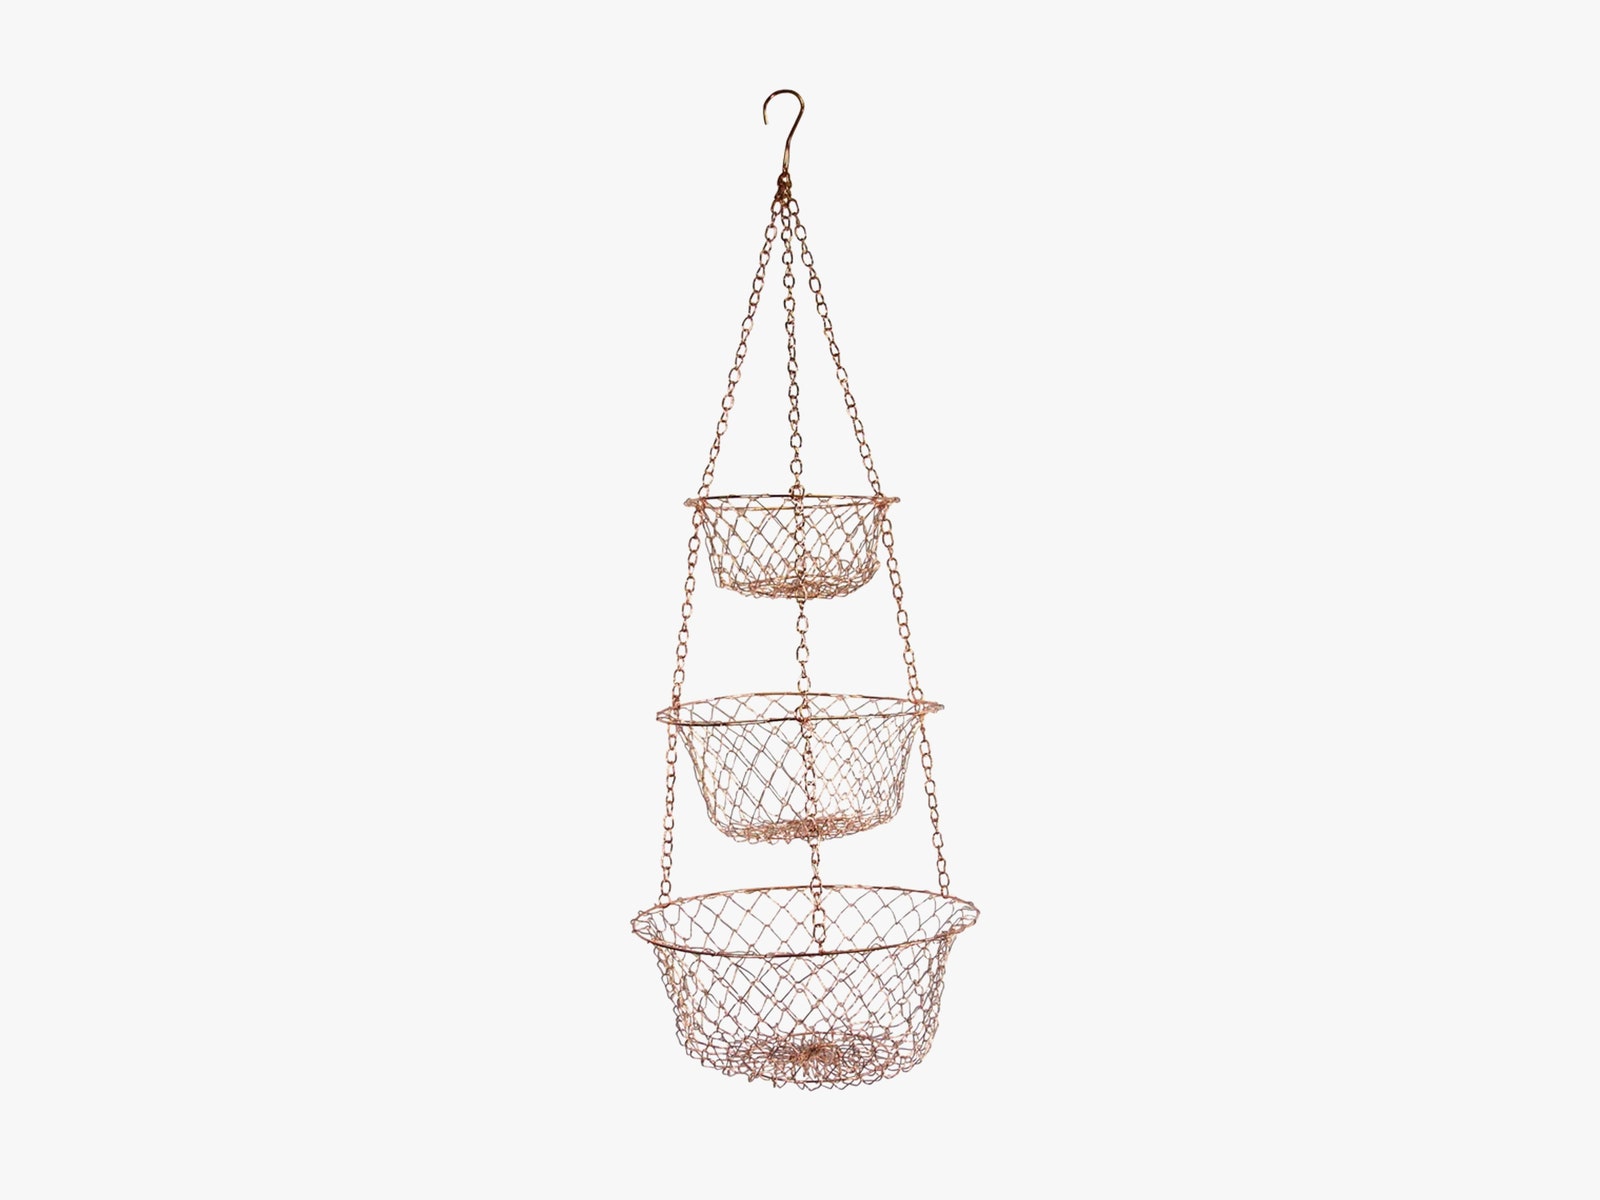 3 gold meshchain baskets in increasing size suspended above each other